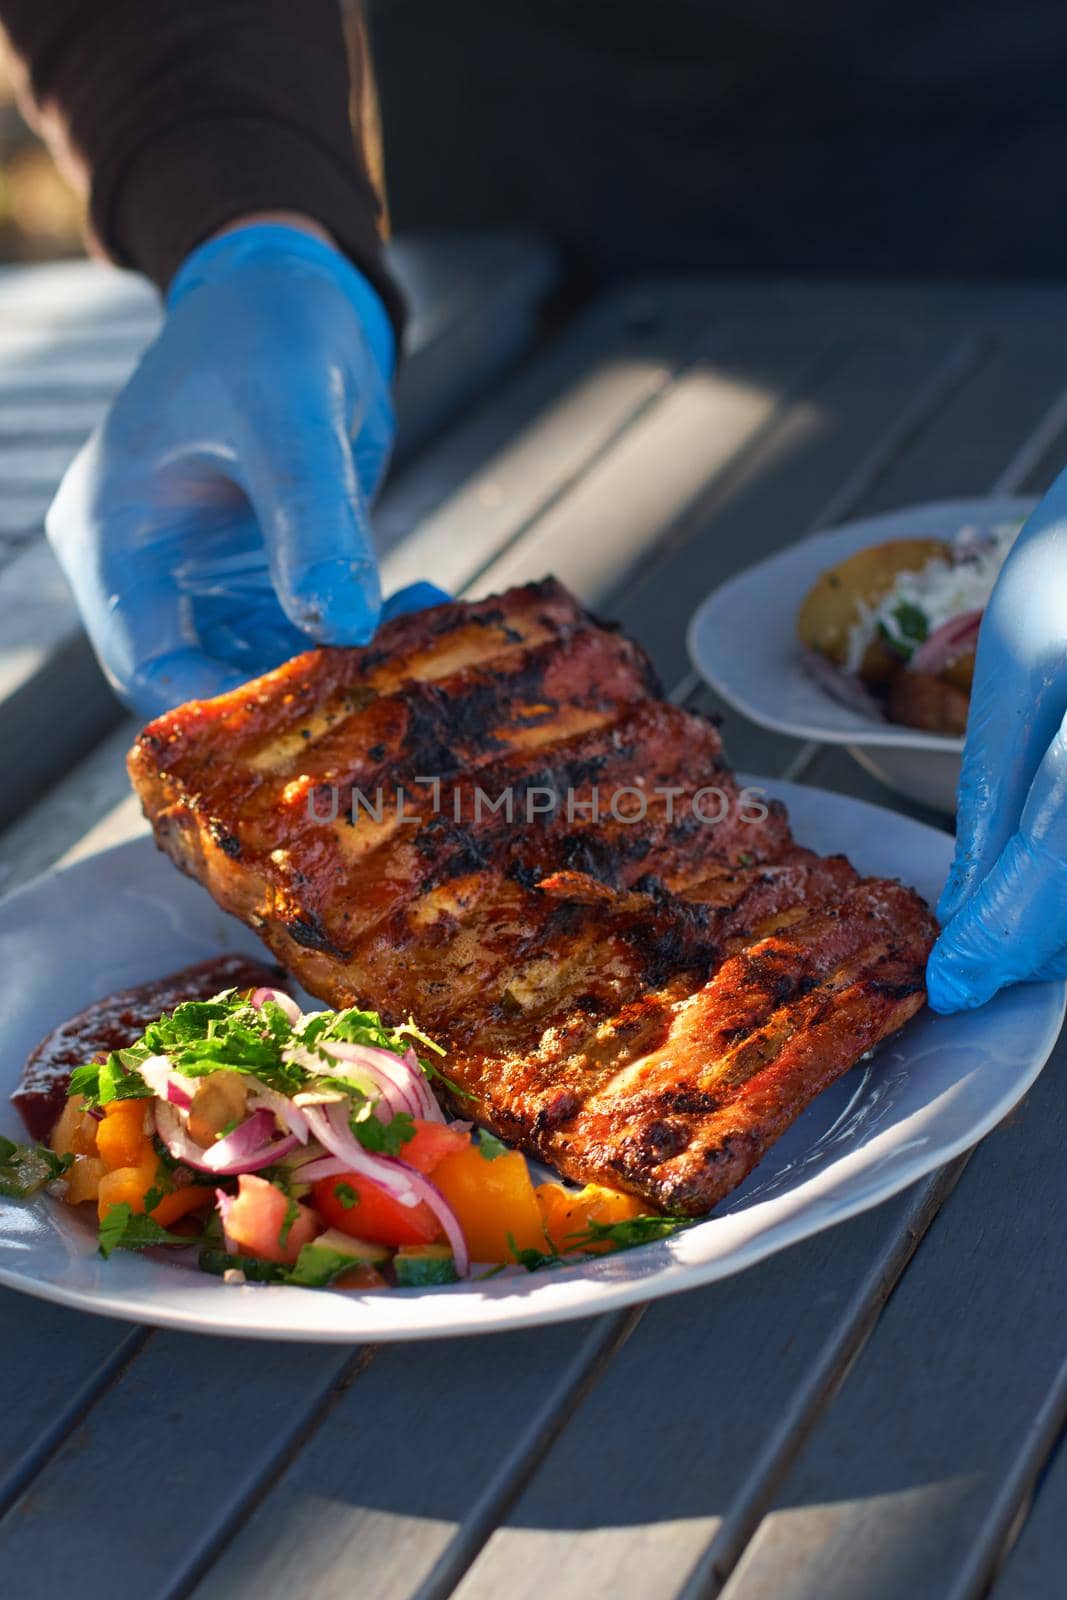 Chef cooked BBQ ribs sliced with hot honey and chili marinade, street food